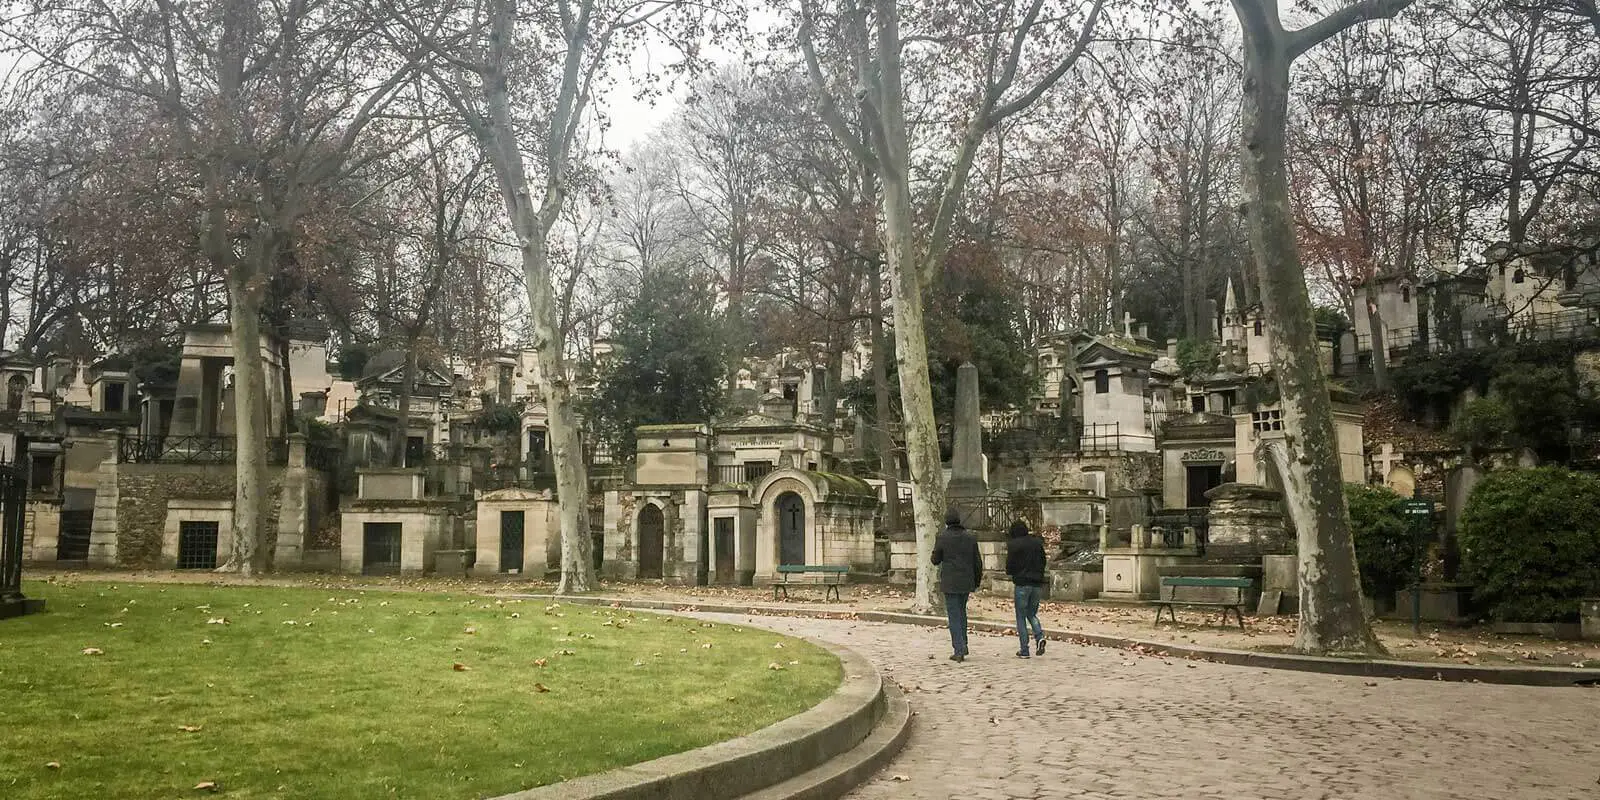 Two people walking through the hauntingly beautiful Père Lachaise cemetery in Paris on a gloomy day.